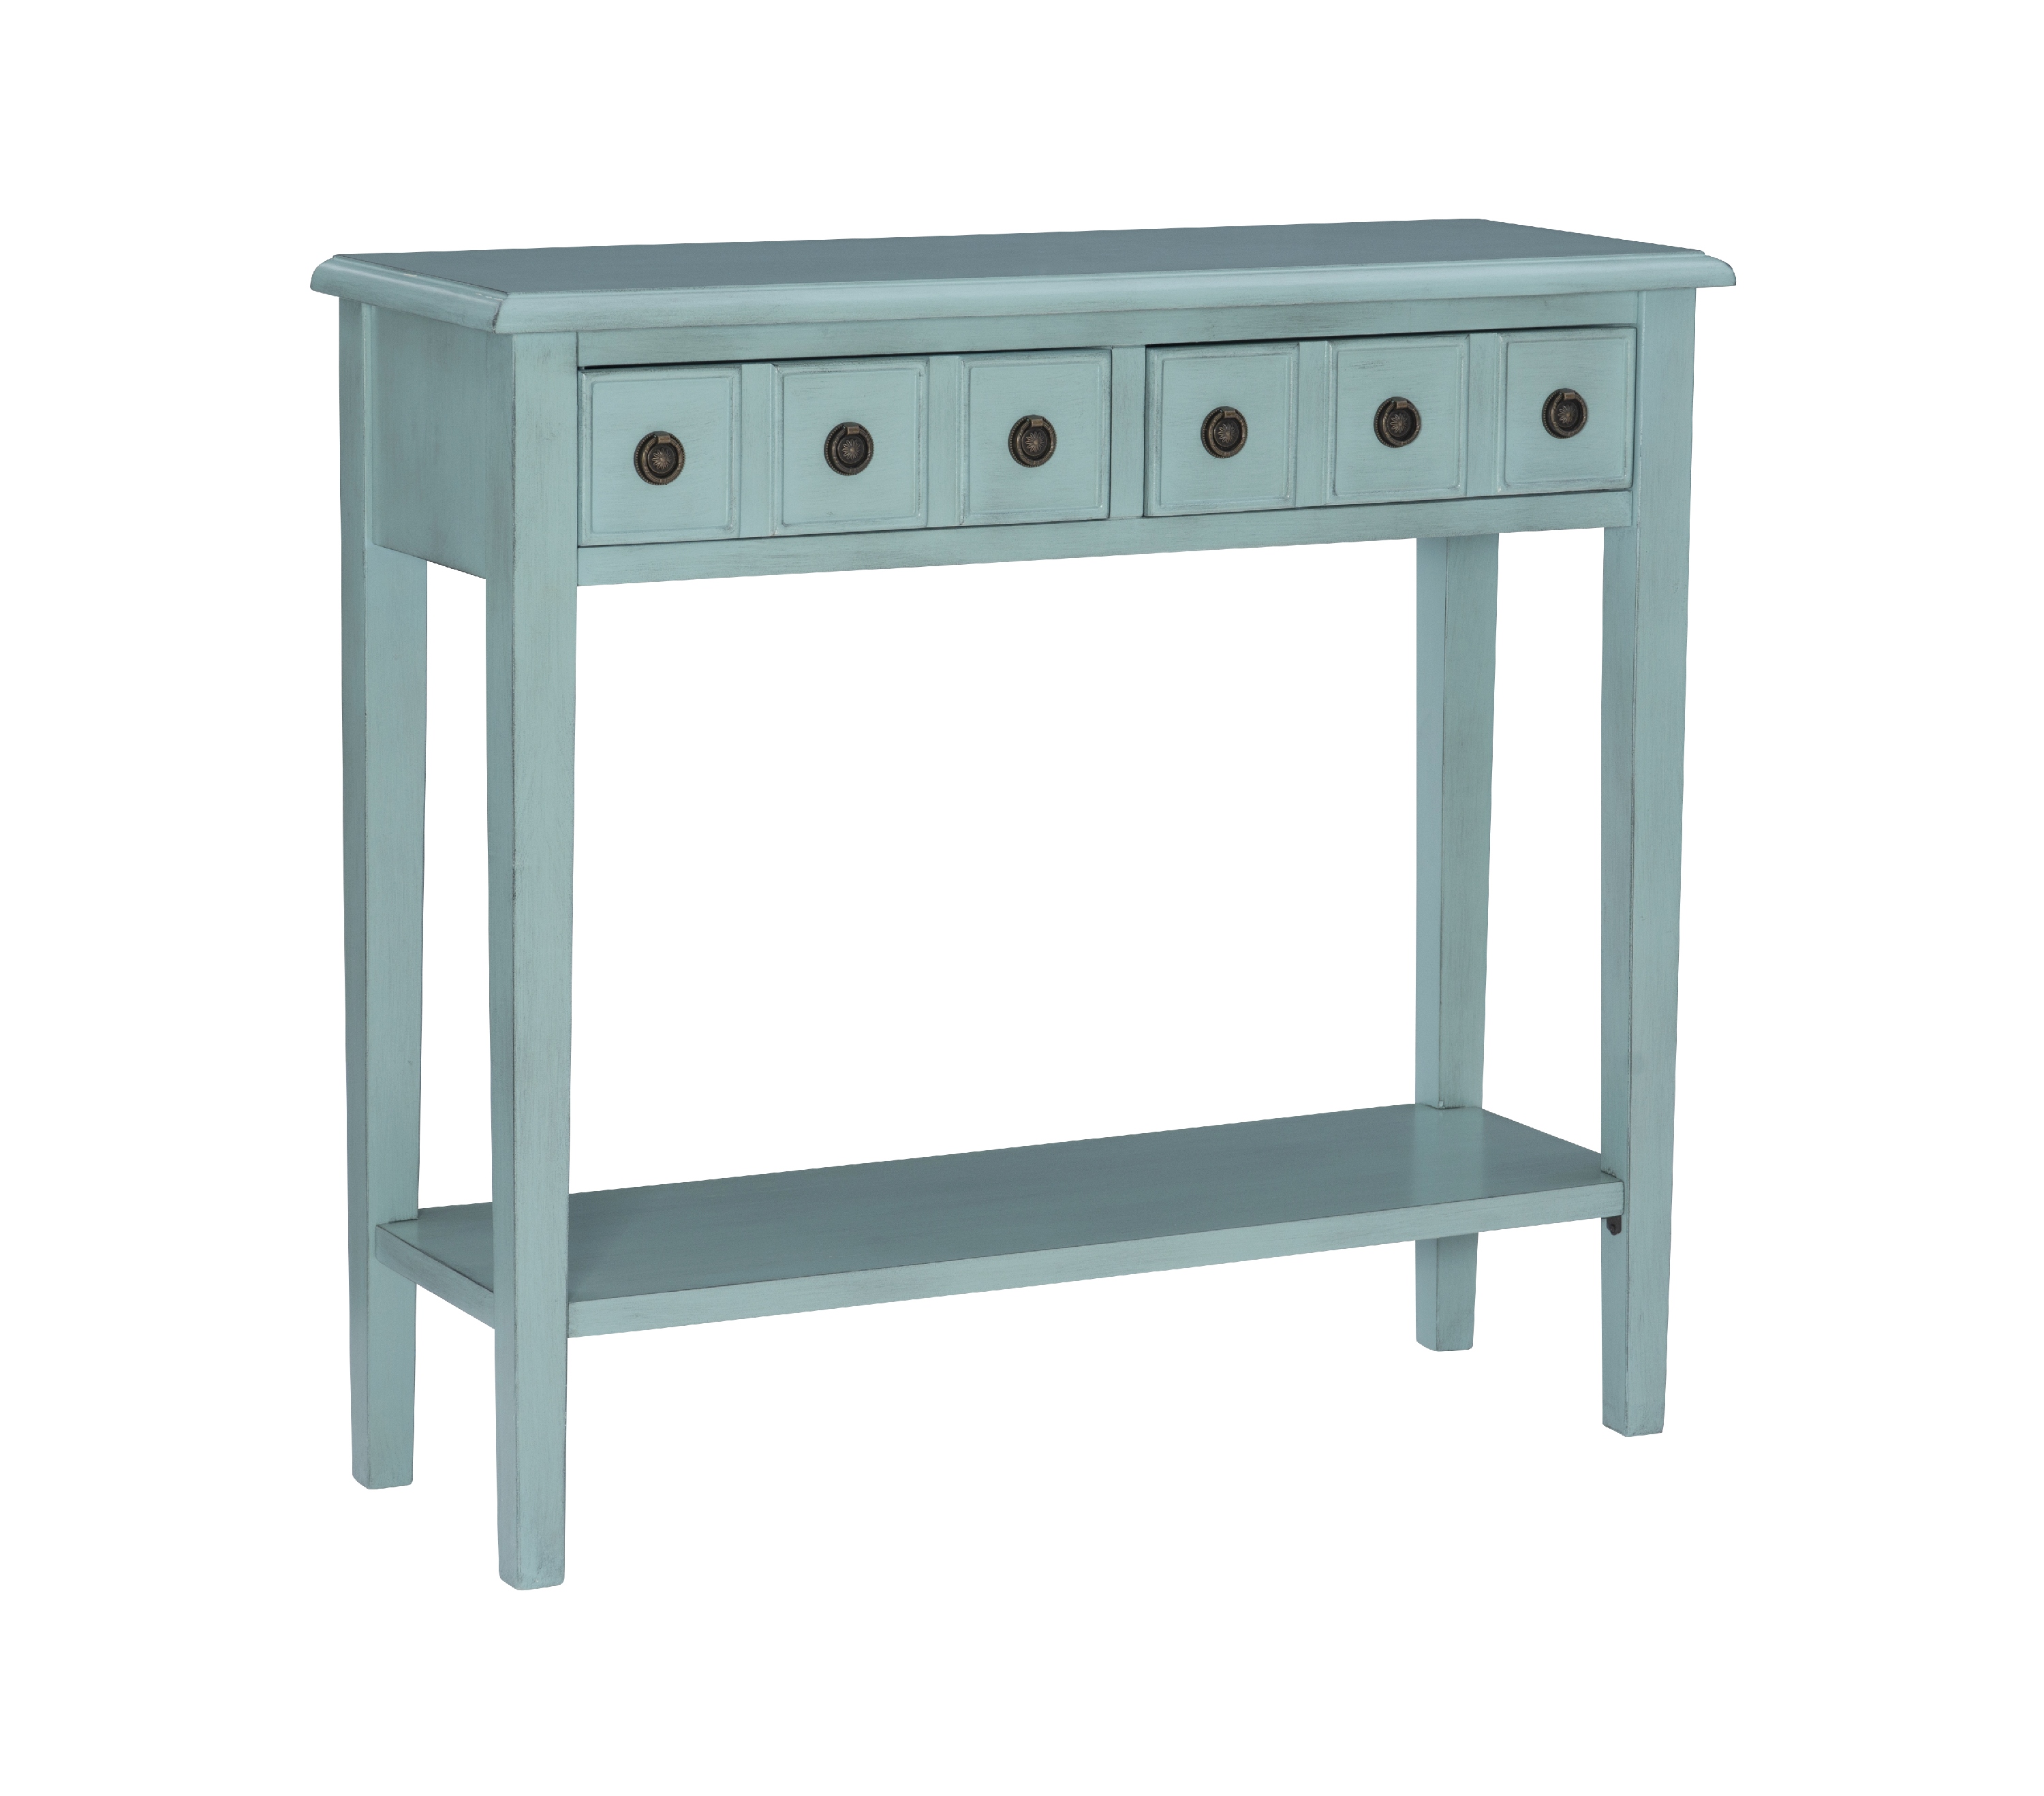 Sadie Farmhouse 2-Drawer Short Console Table with Shelf, Teal - image 1 of 14